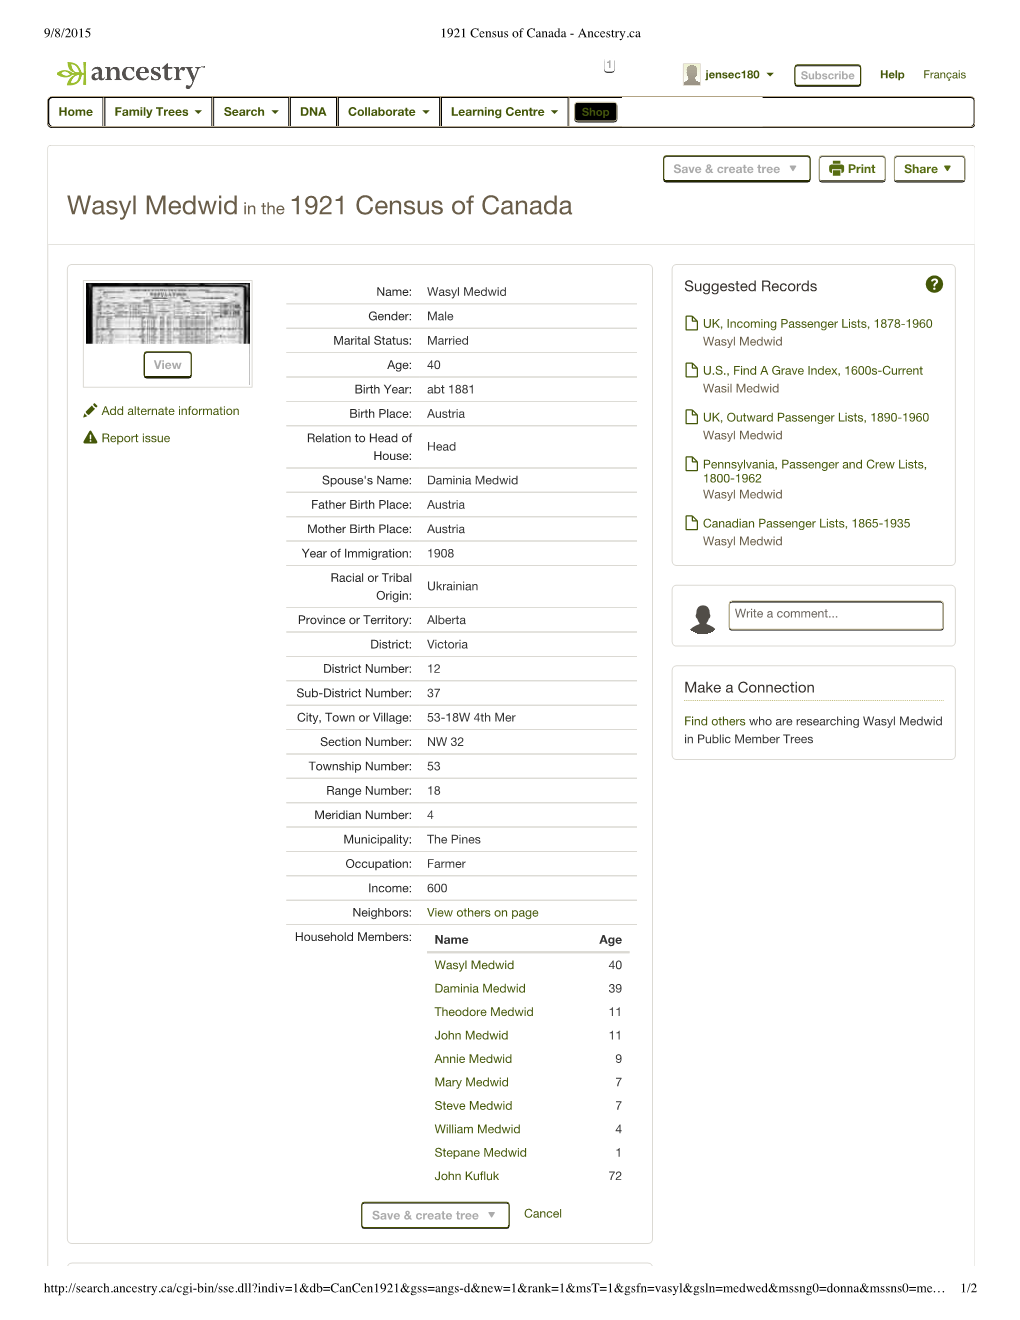 Wasyl Medwid in the 1921 Census of Canada